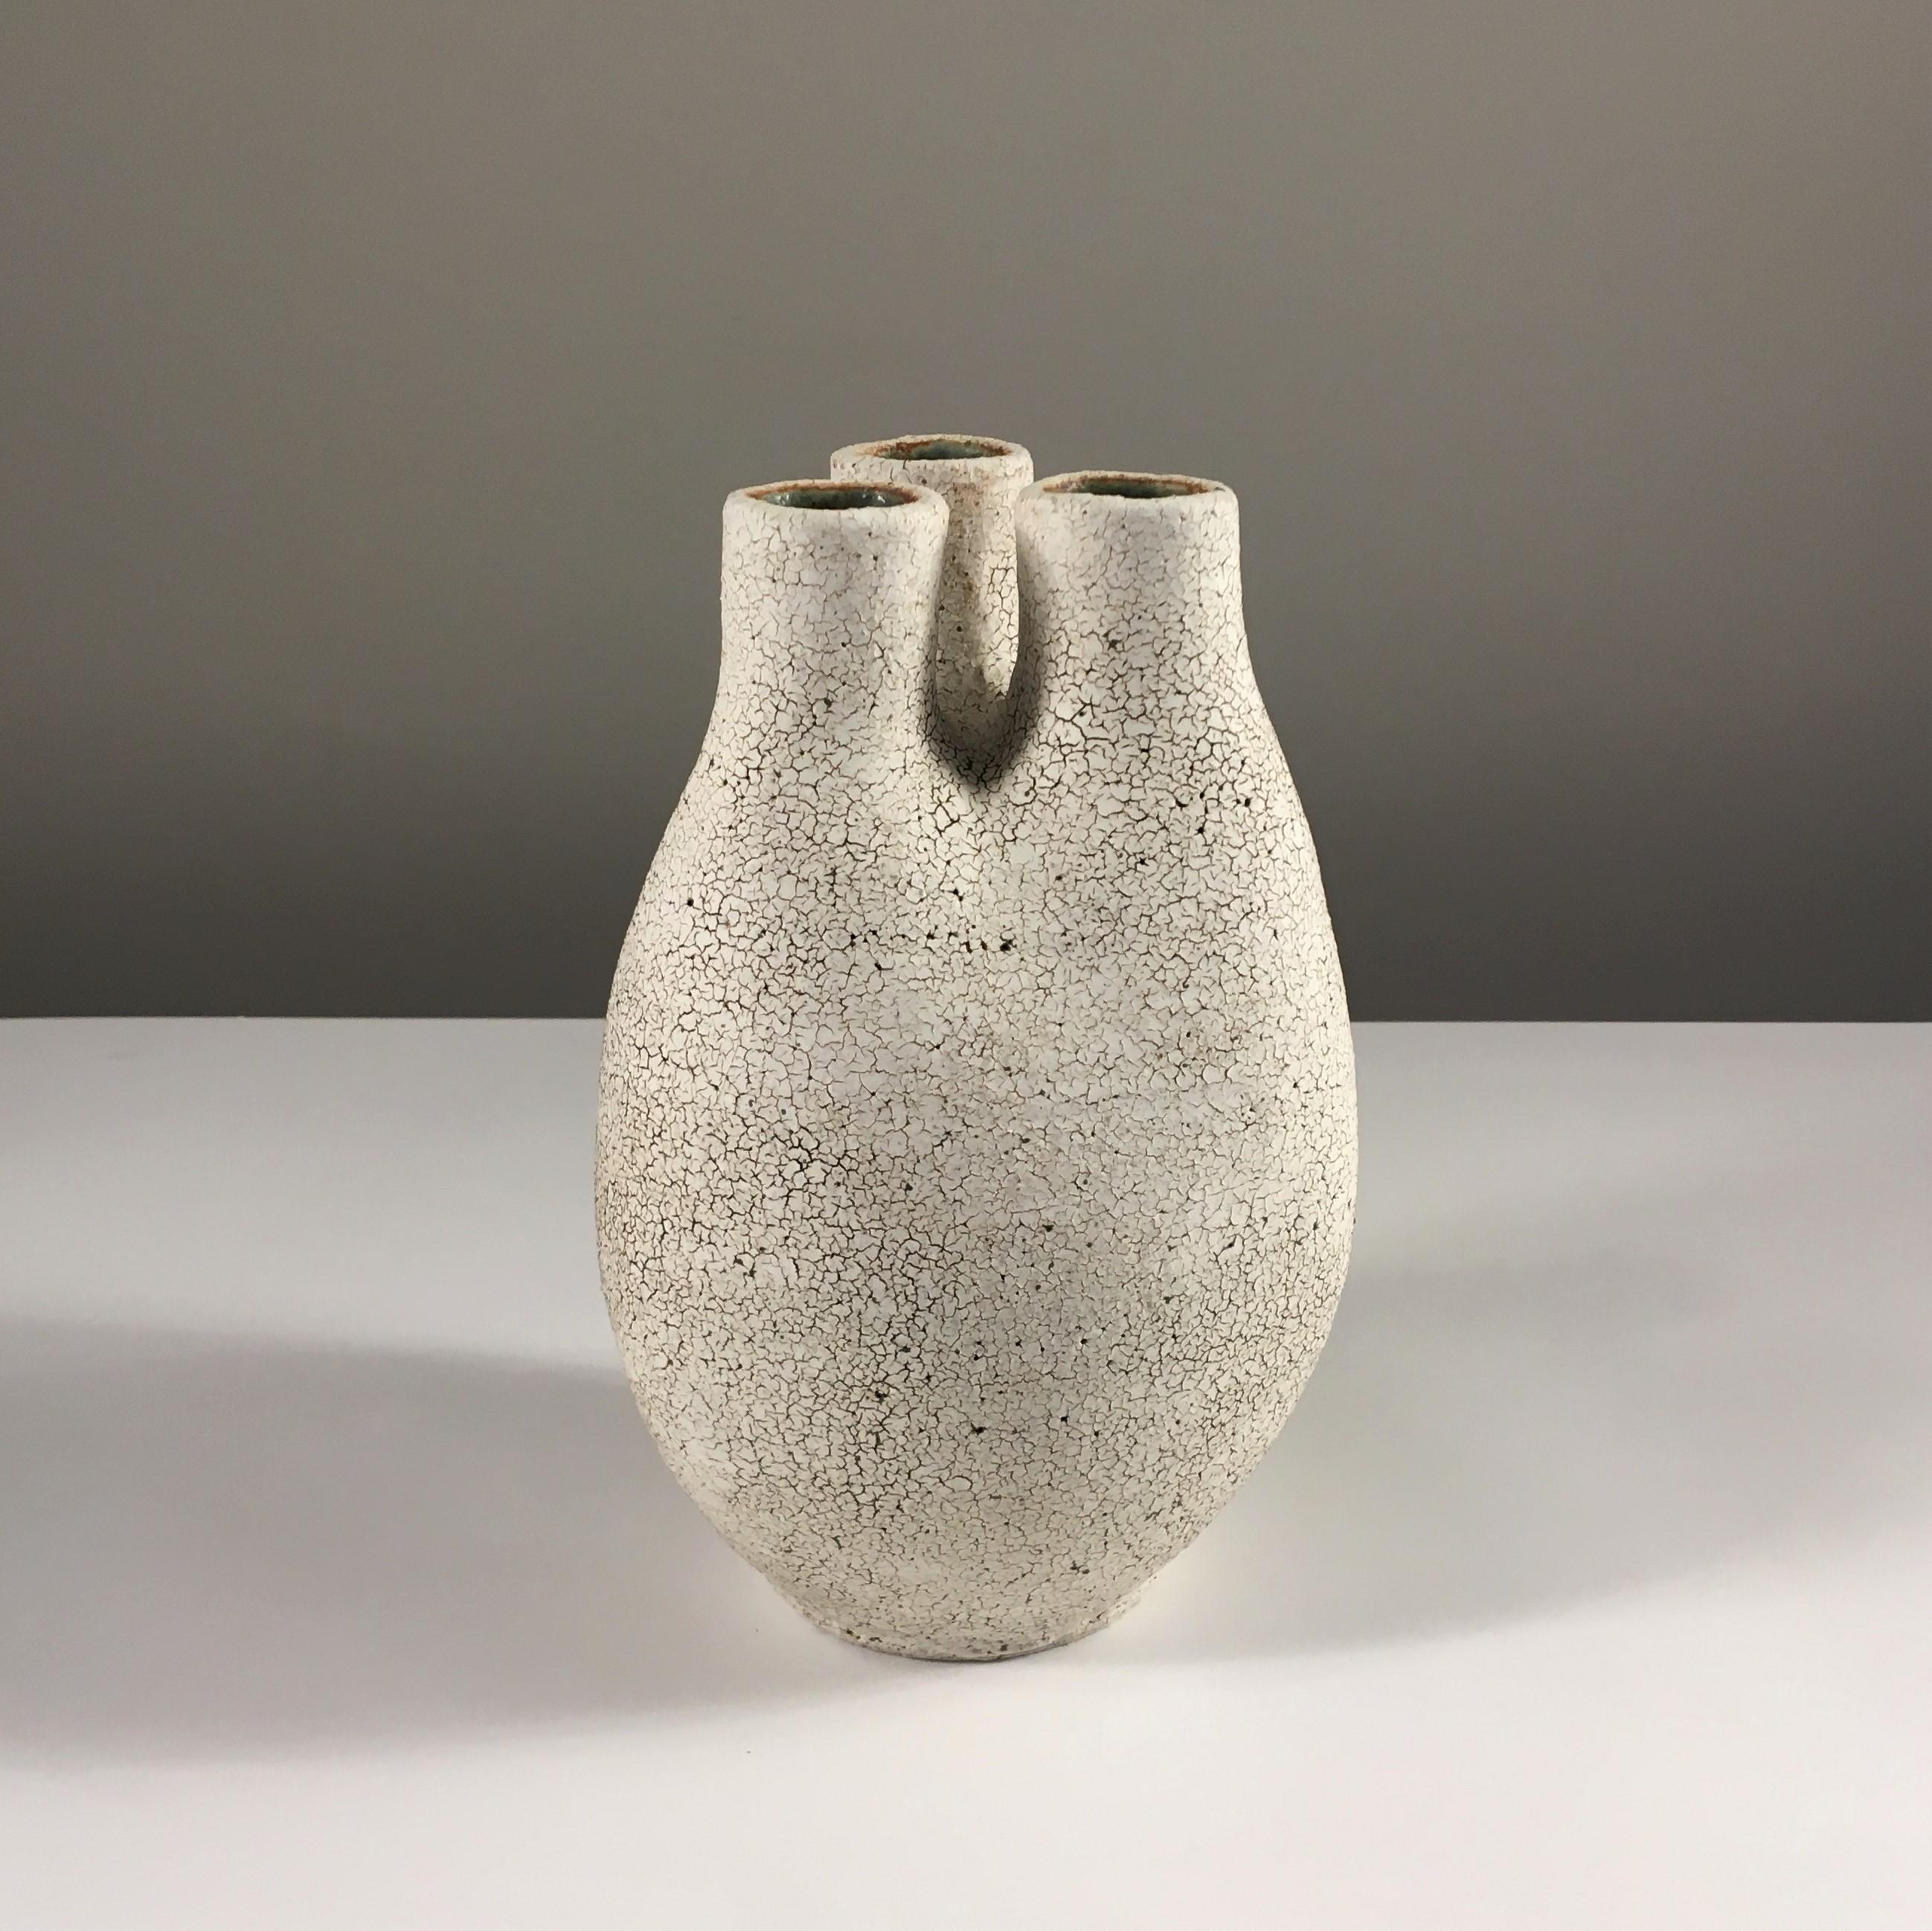 Tri-neck Vase by Yumiko Kuga. Dimensions: Height 8.25